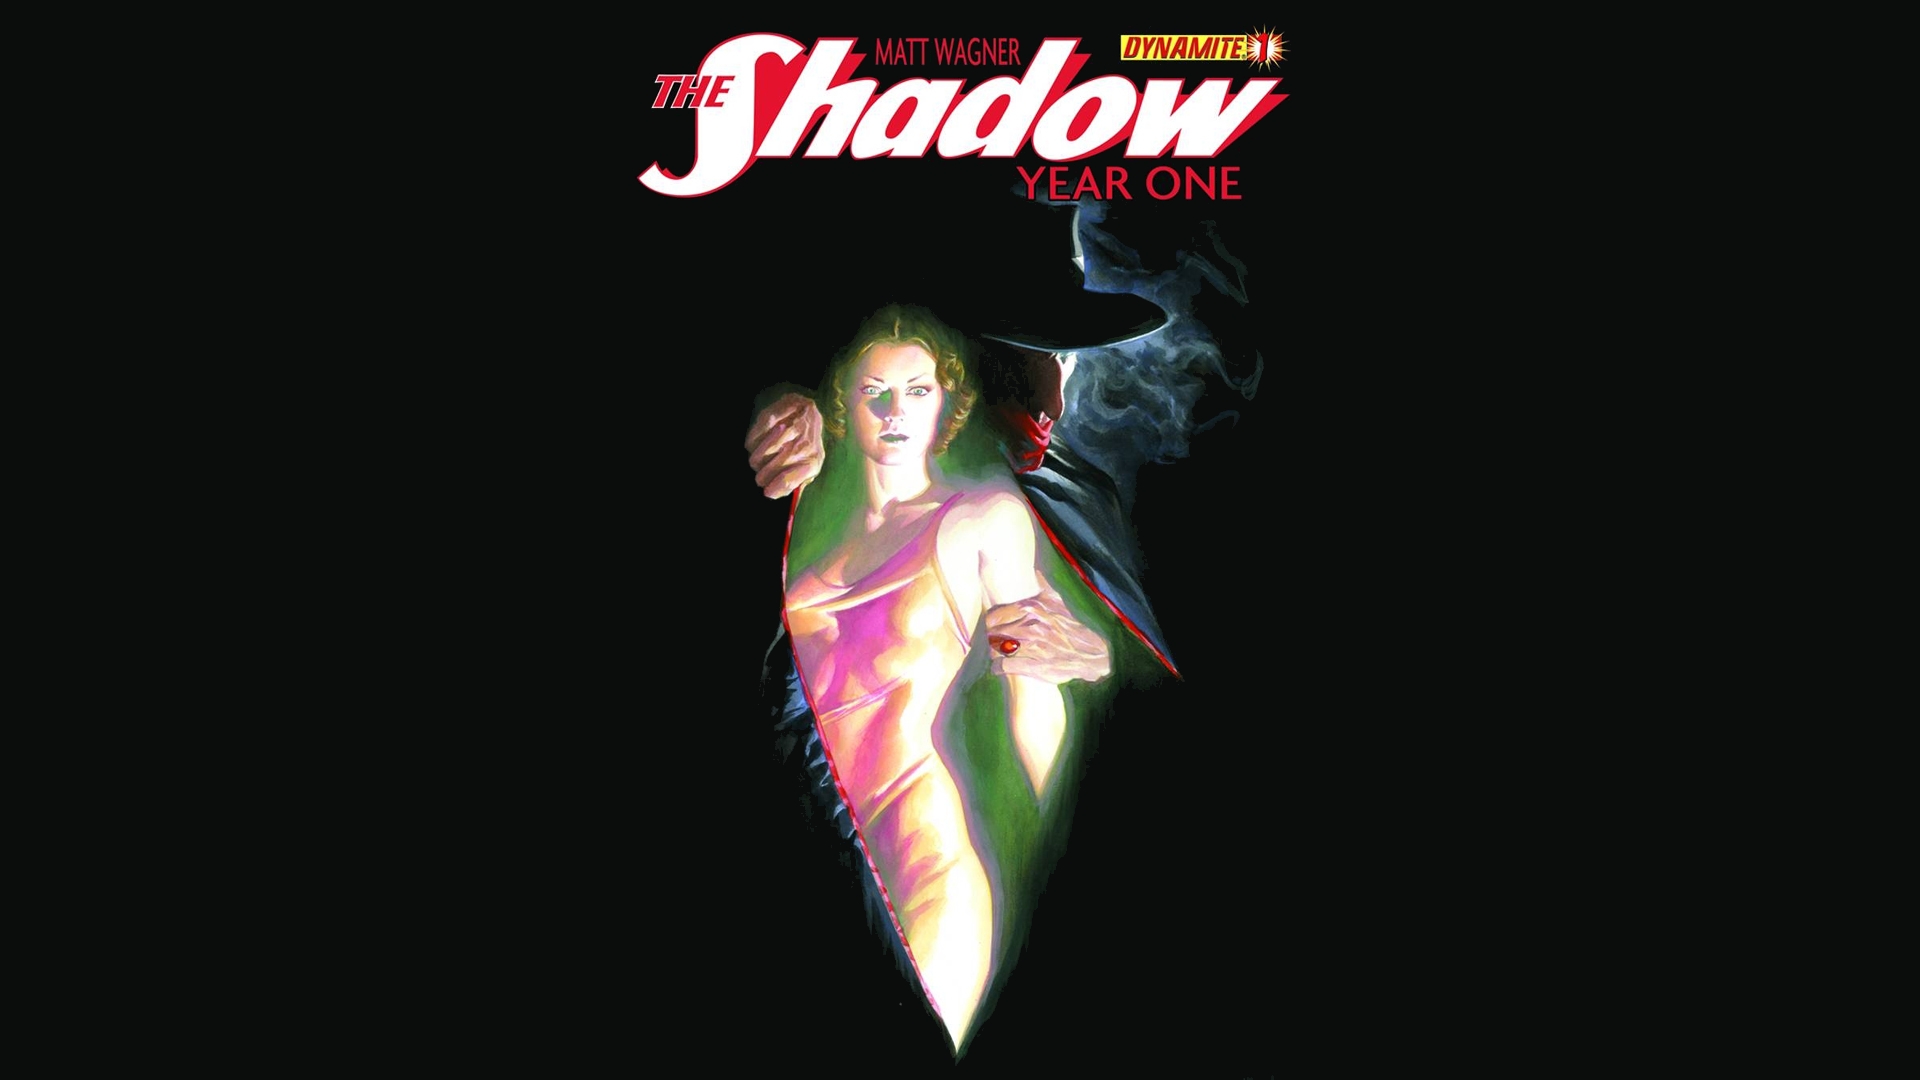 Comics The Shadow HD Wallpaper | Background Image